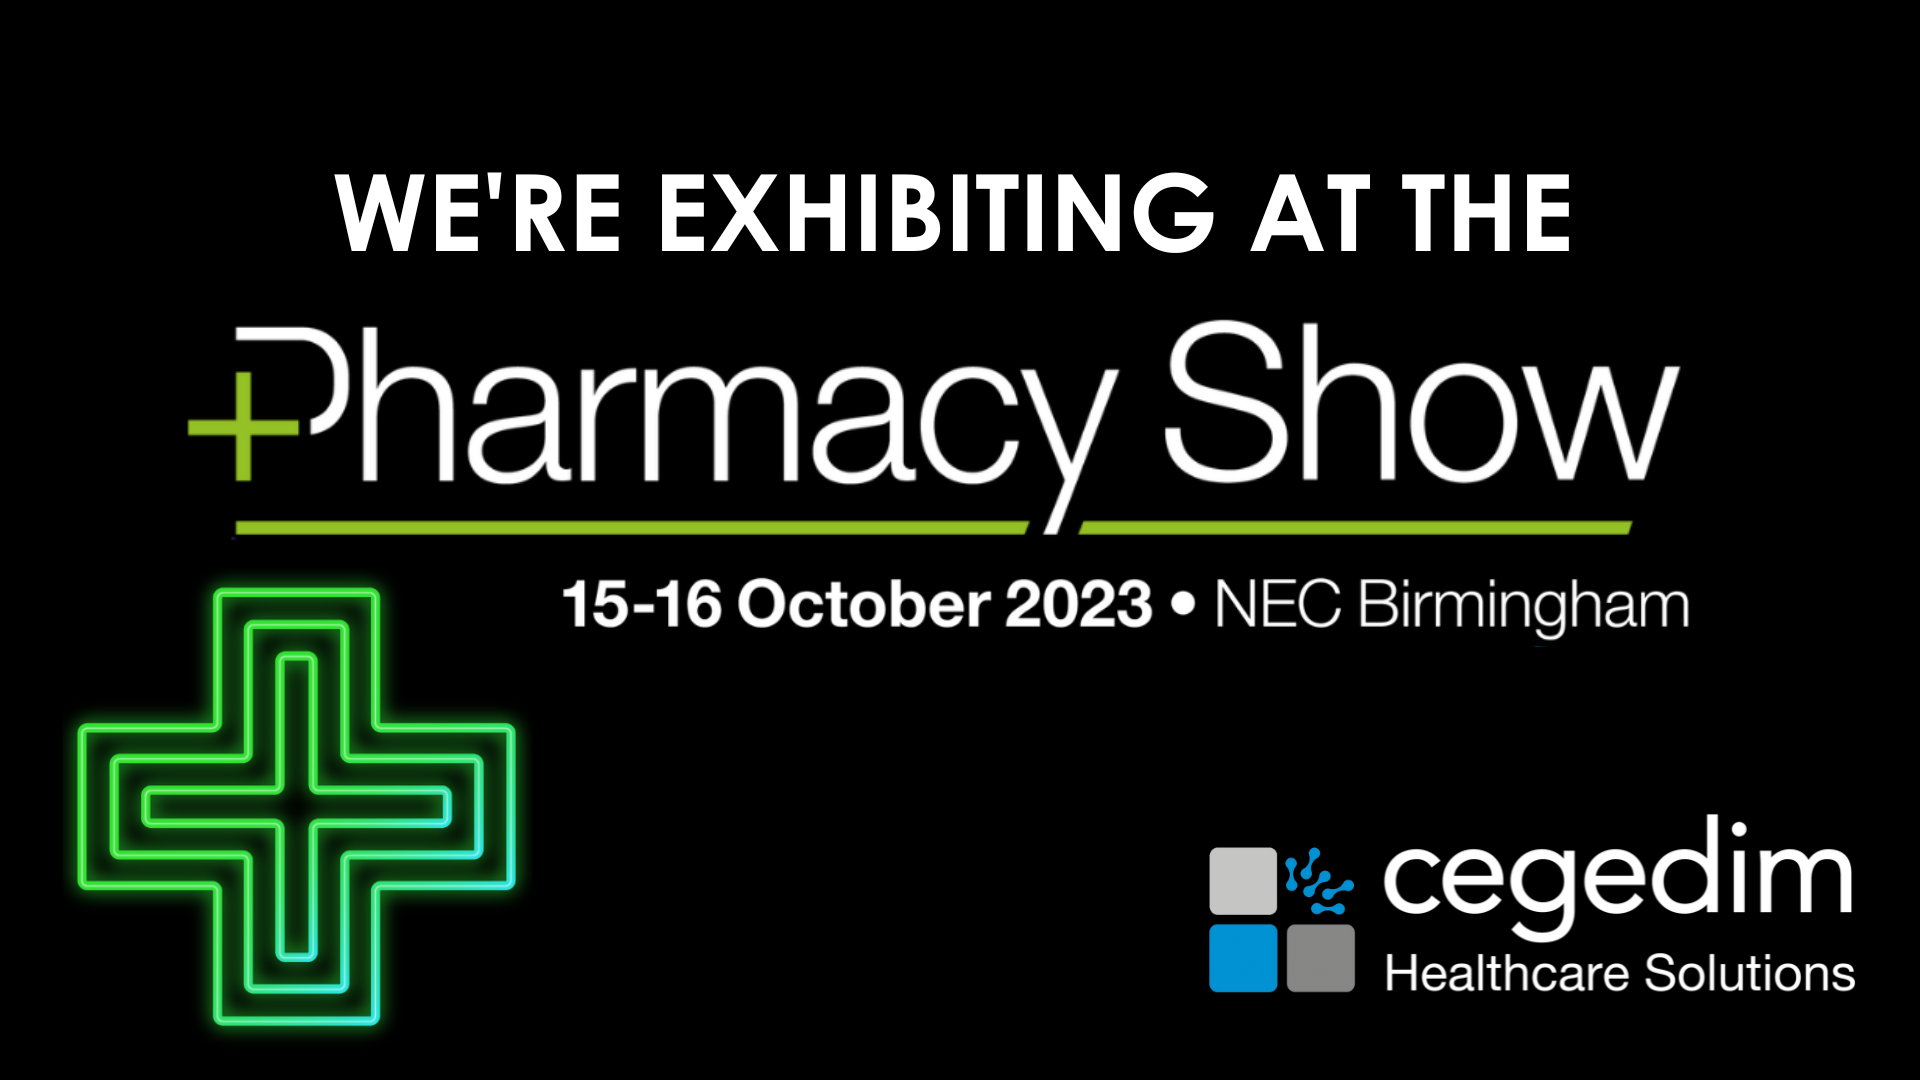 Boost your business at The Pharmacy Show 2023